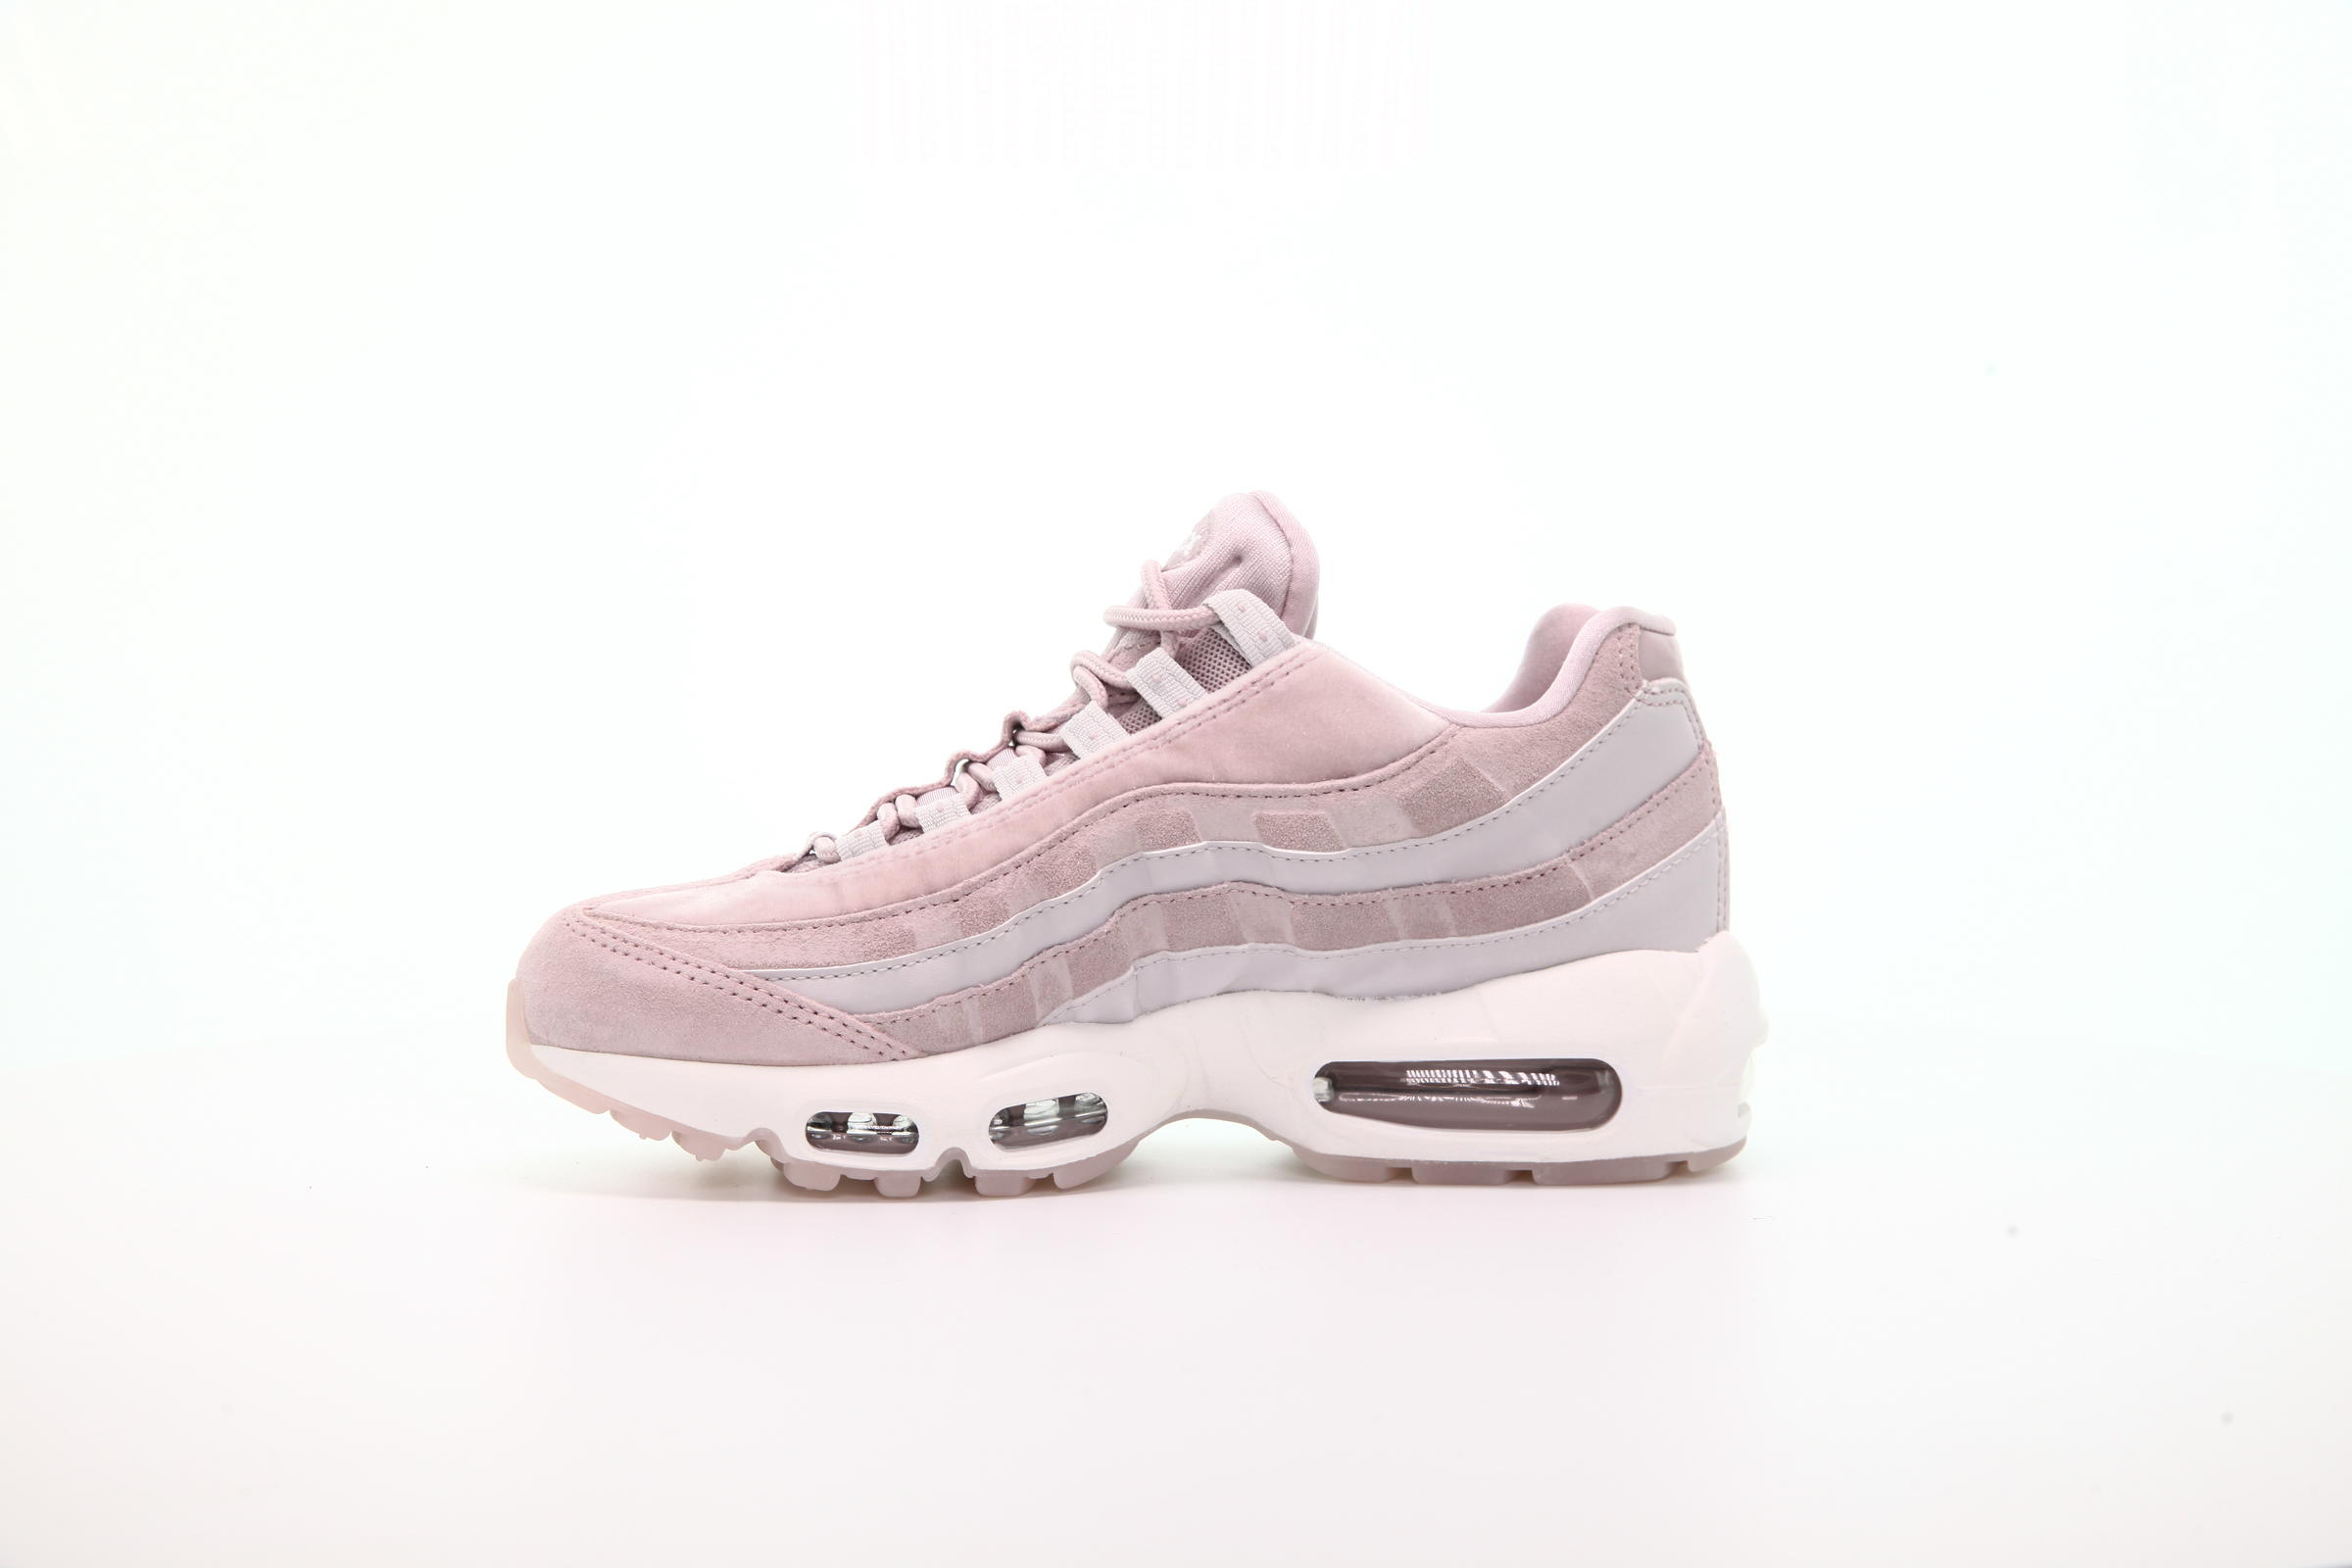 Nike WMNS Air Max 95 LX "Particle Rose"